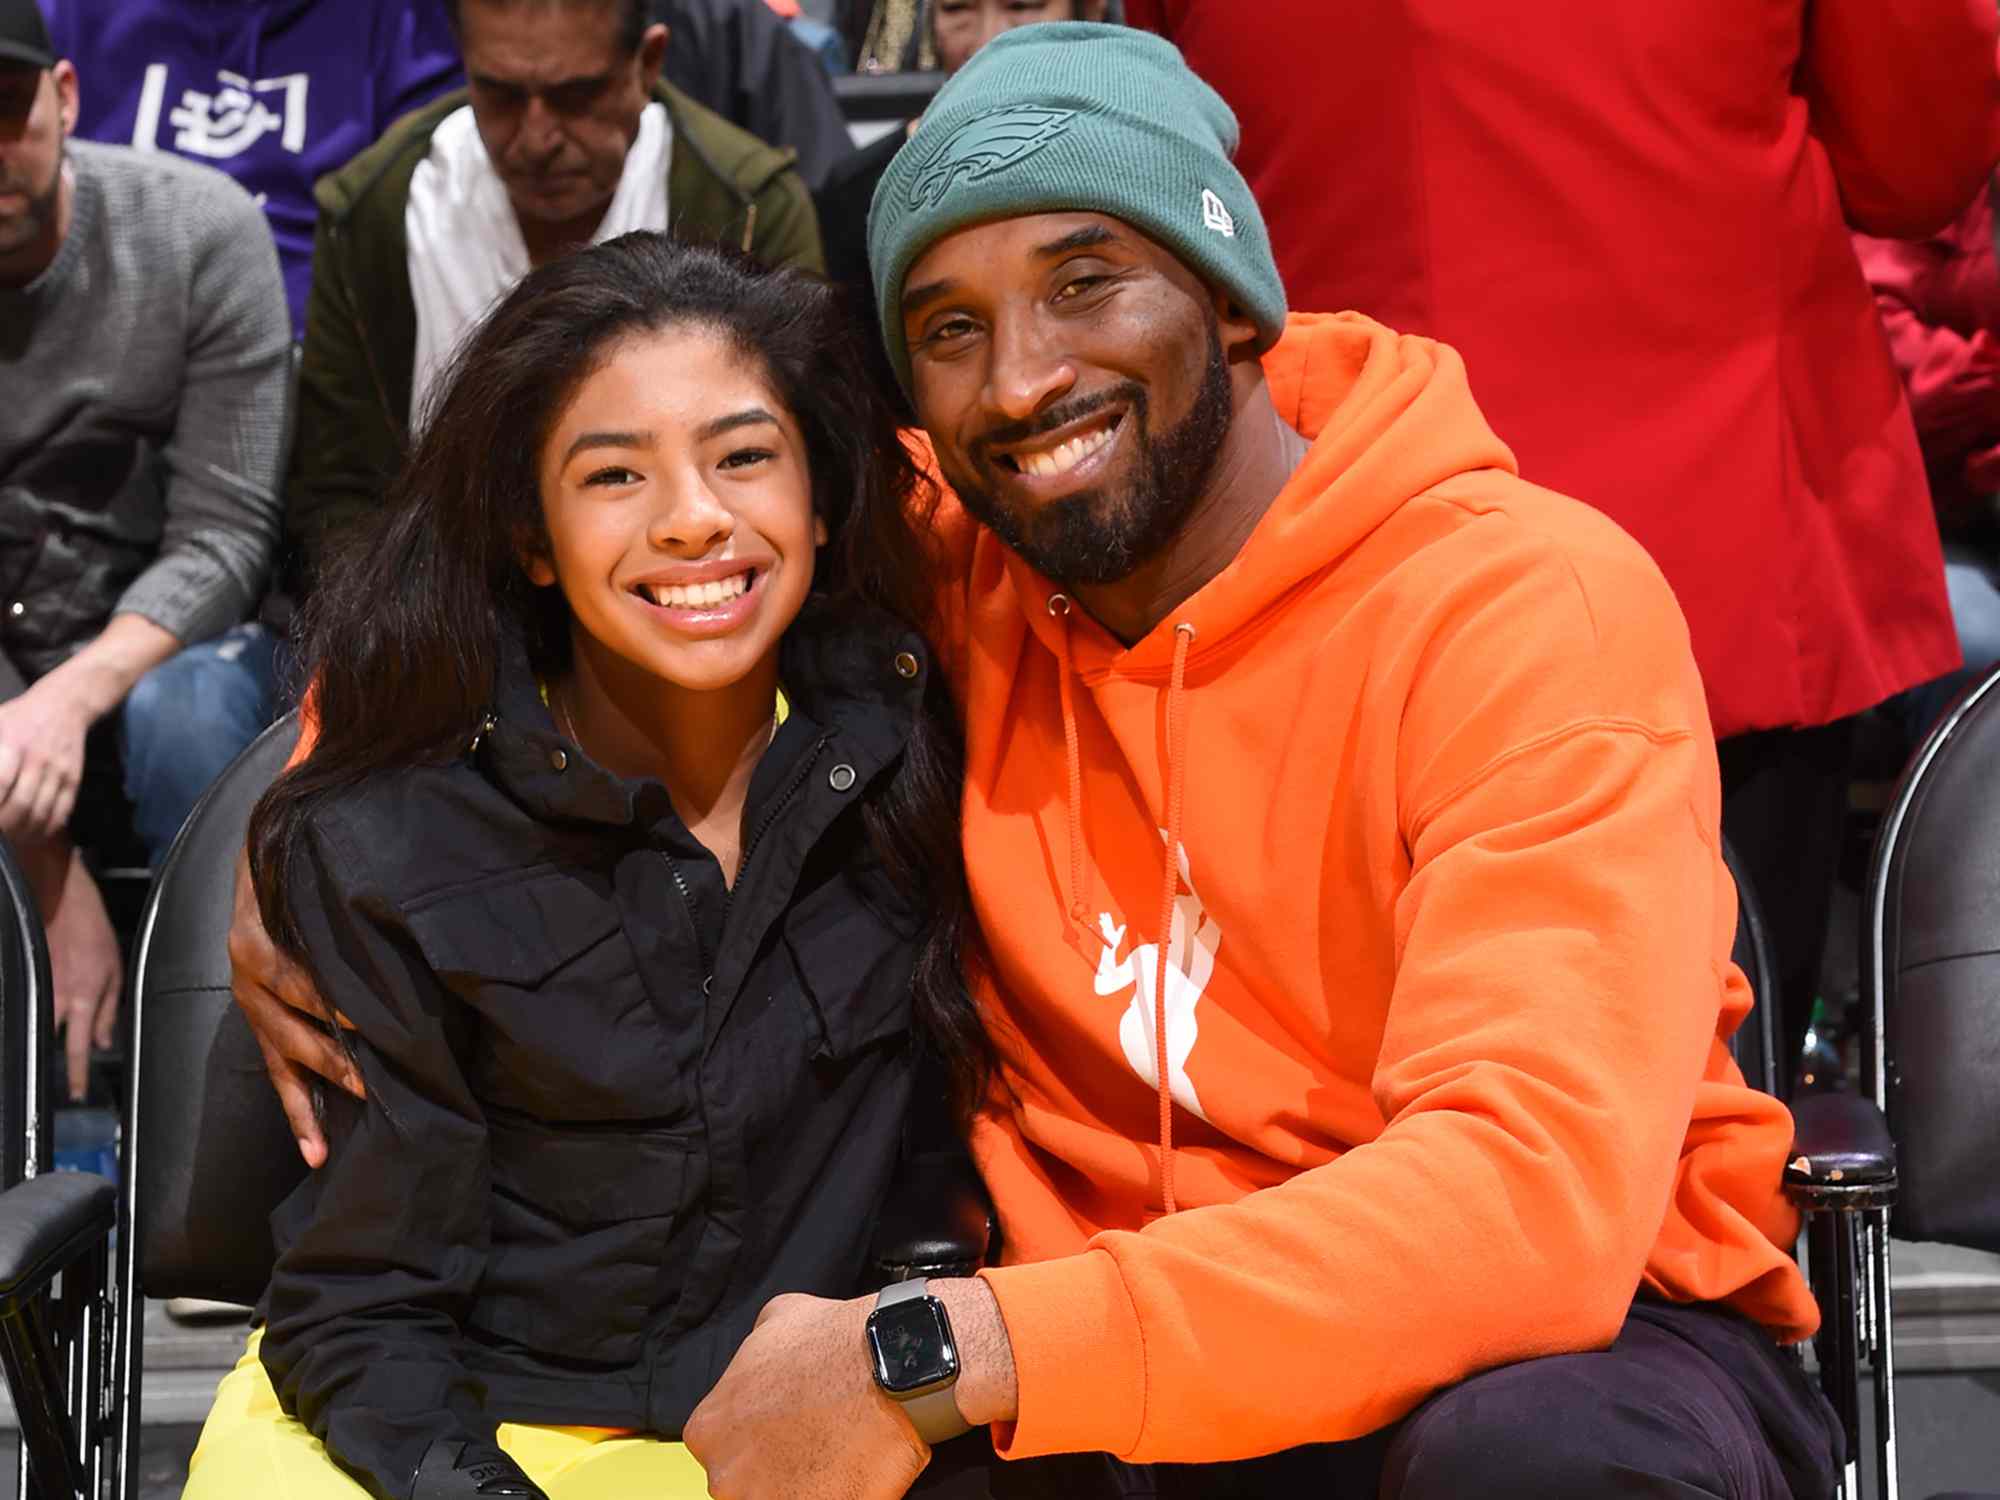 Kobe Bryant and Gianna Bryant attends the game between the Los Angeles Lakers and the Dallas Mavericks on December 29, 2019.